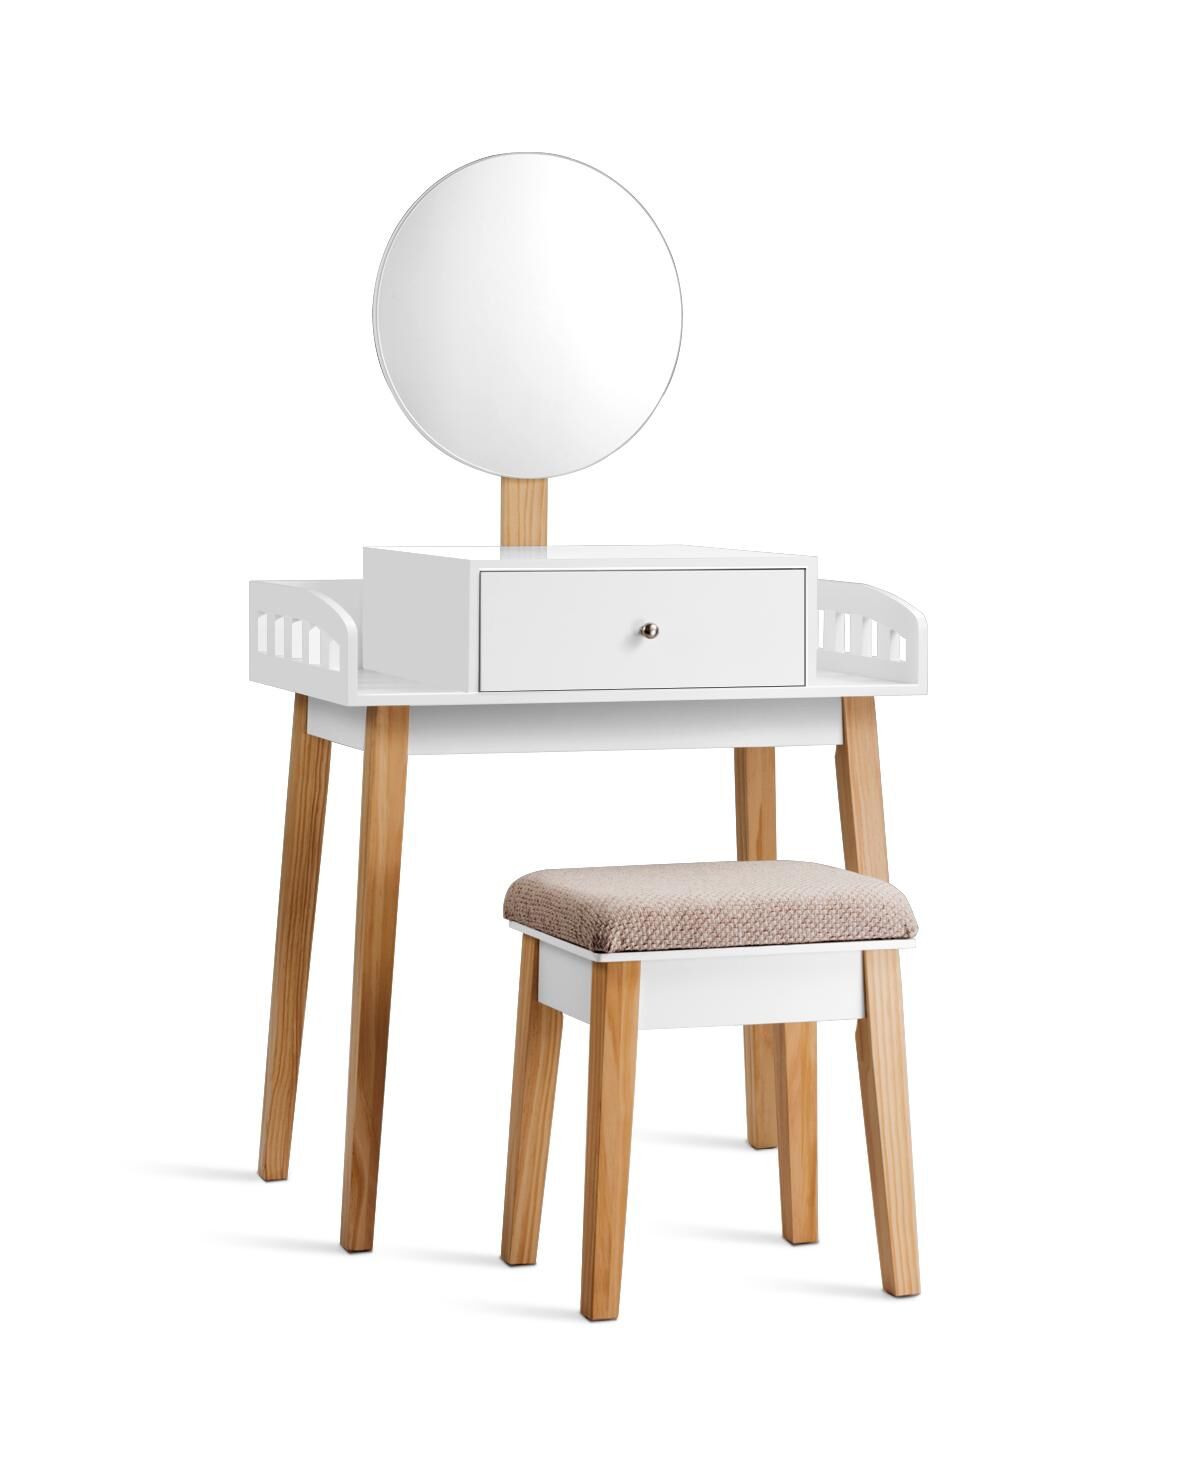 Costway Wooden Vanity Makeup Dressing Table Stool Round w/Drawer - White